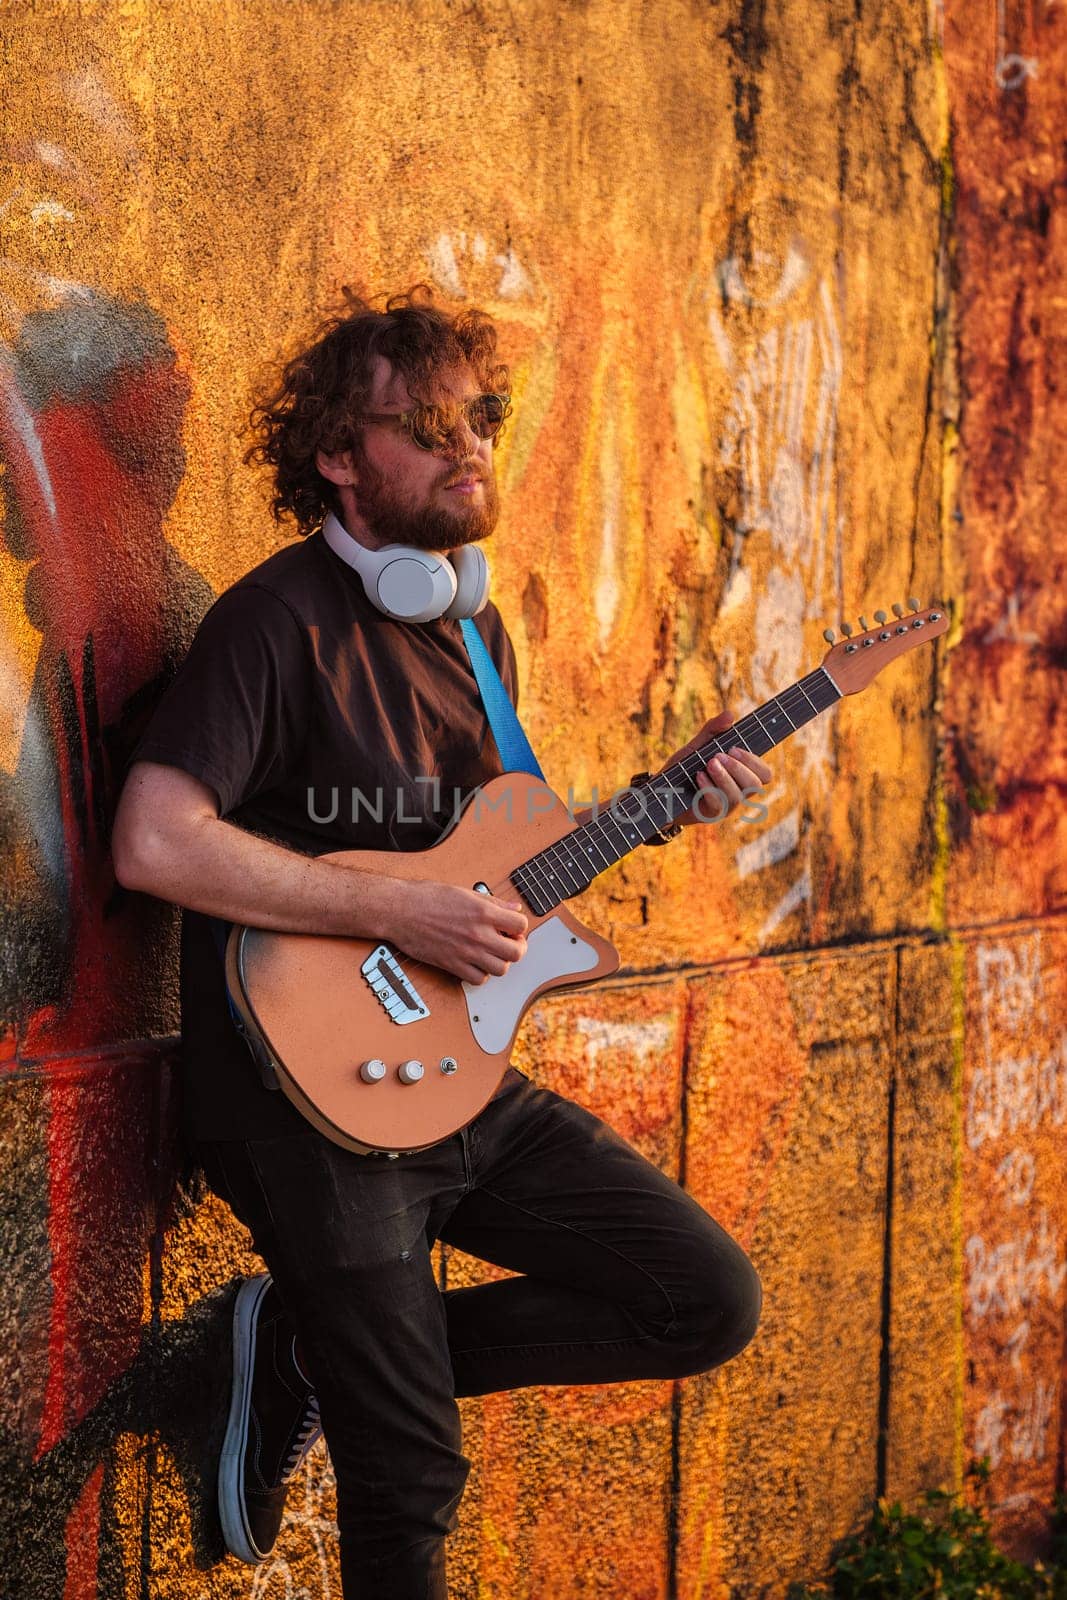 Hipster street musician in black playing electric guitar in the street on sunset leaning on a painted wall